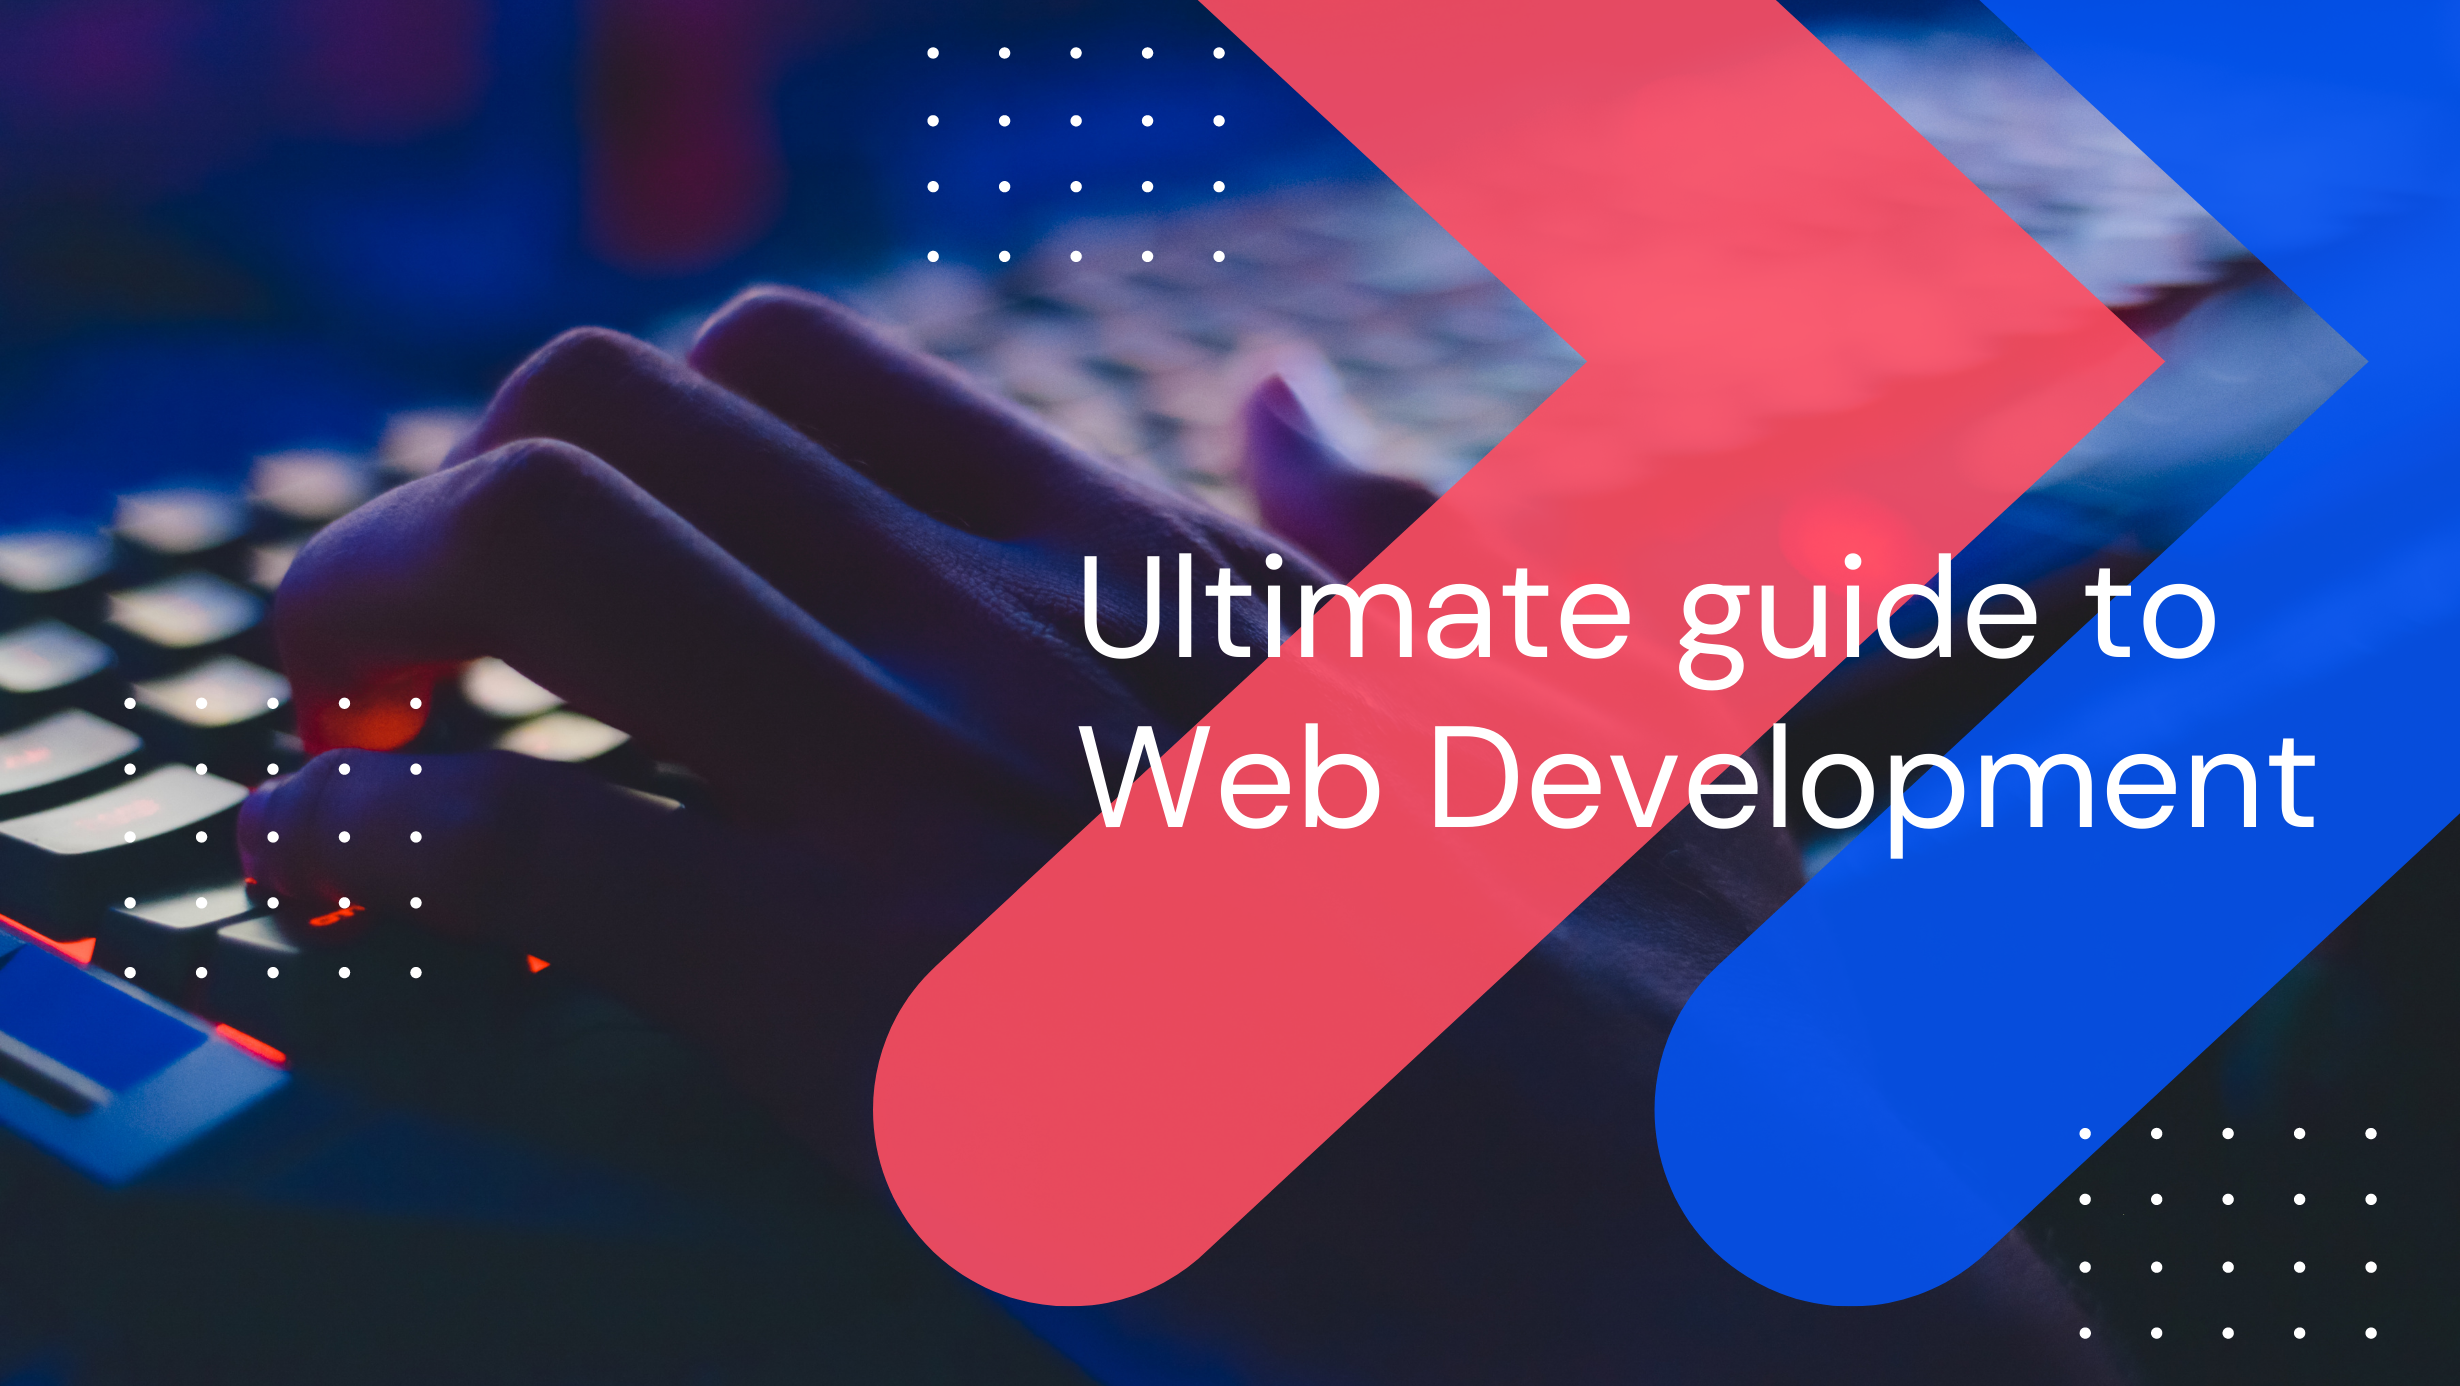 Web application development: Everything you need to know